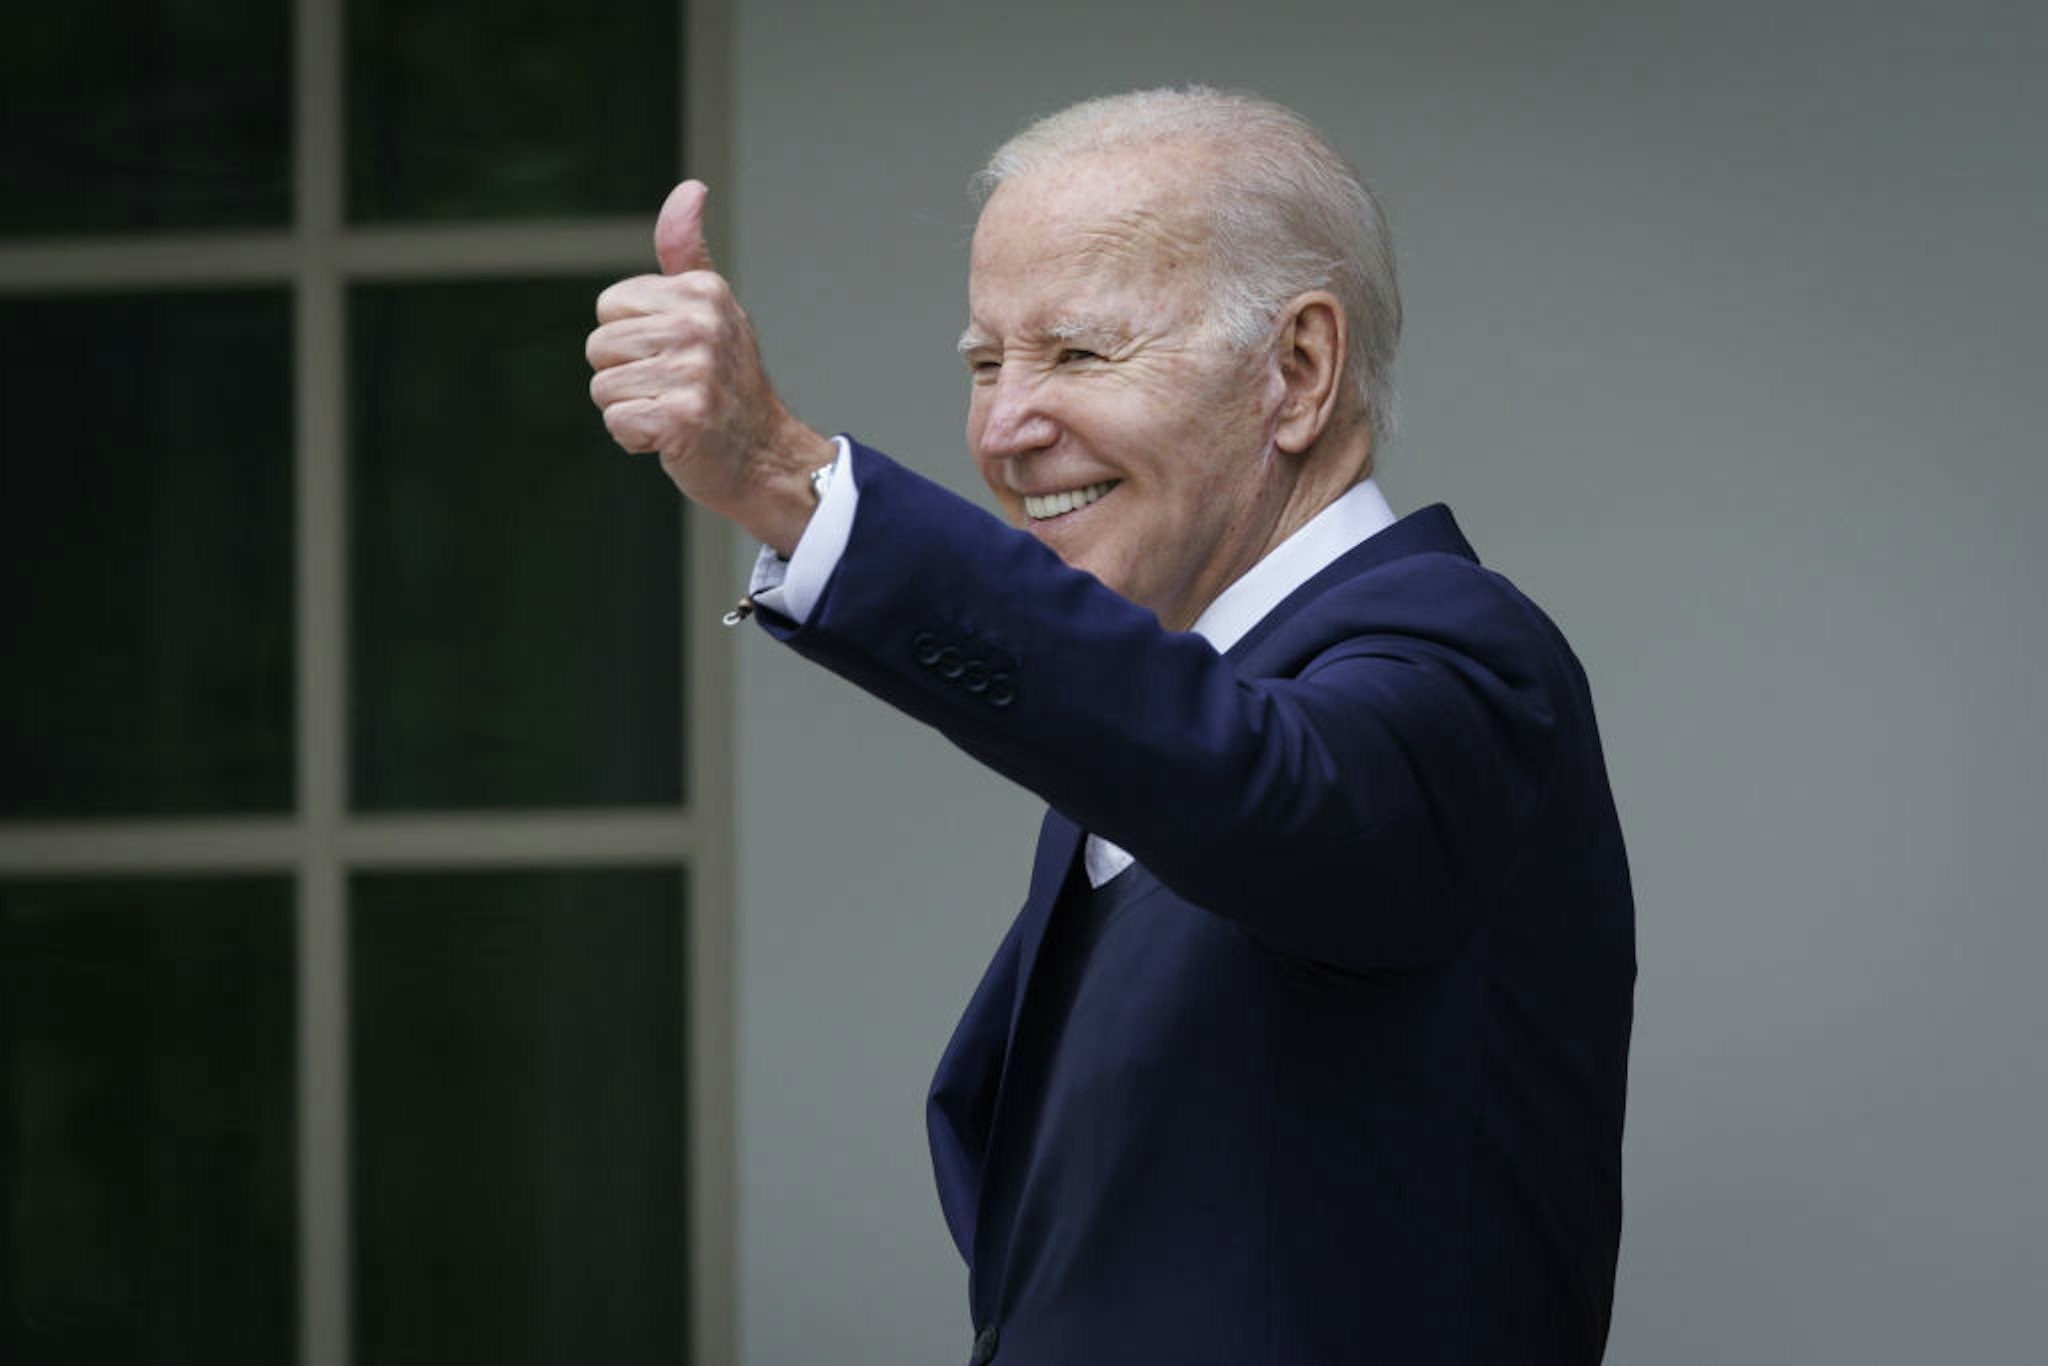 US President Joe Biden, waves back to the crowd during a National Small Business Week event in the Rose Garden of the White House in Washington, DC, US, on Monday, May 1, 2023. The White House said Biden administration investments in America has led to 10.5 million applications to start small businesses in 2021 and 2022. Photographer: Ting Shen/Bloomberg via Getty Images